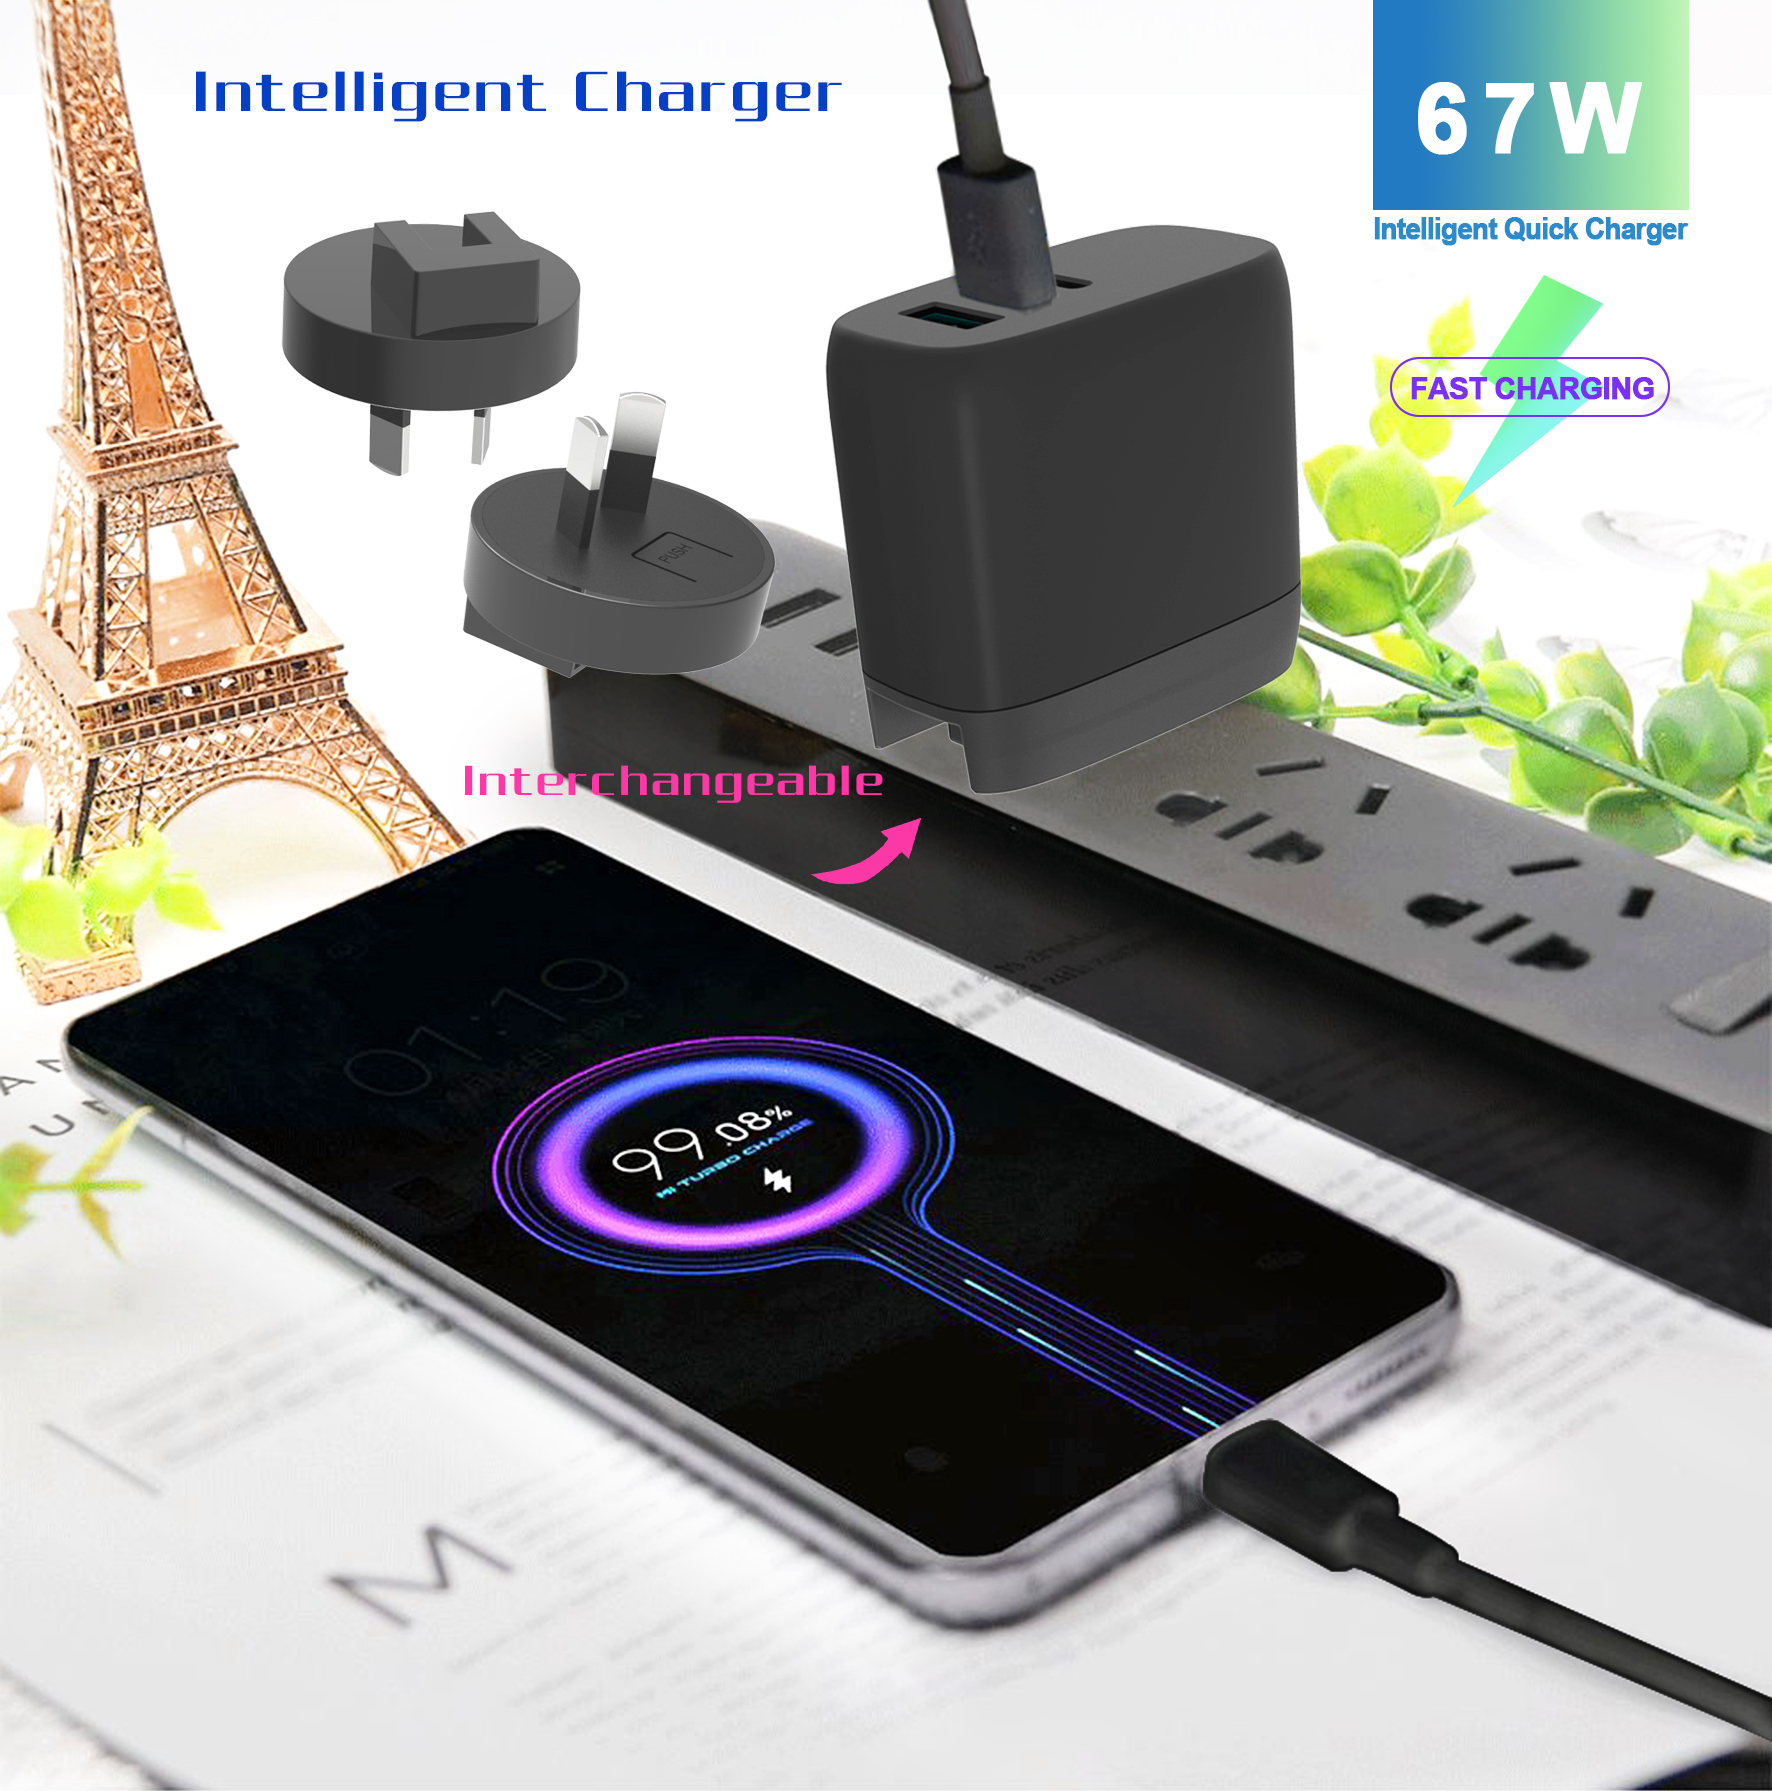 67W Intelligent Charger